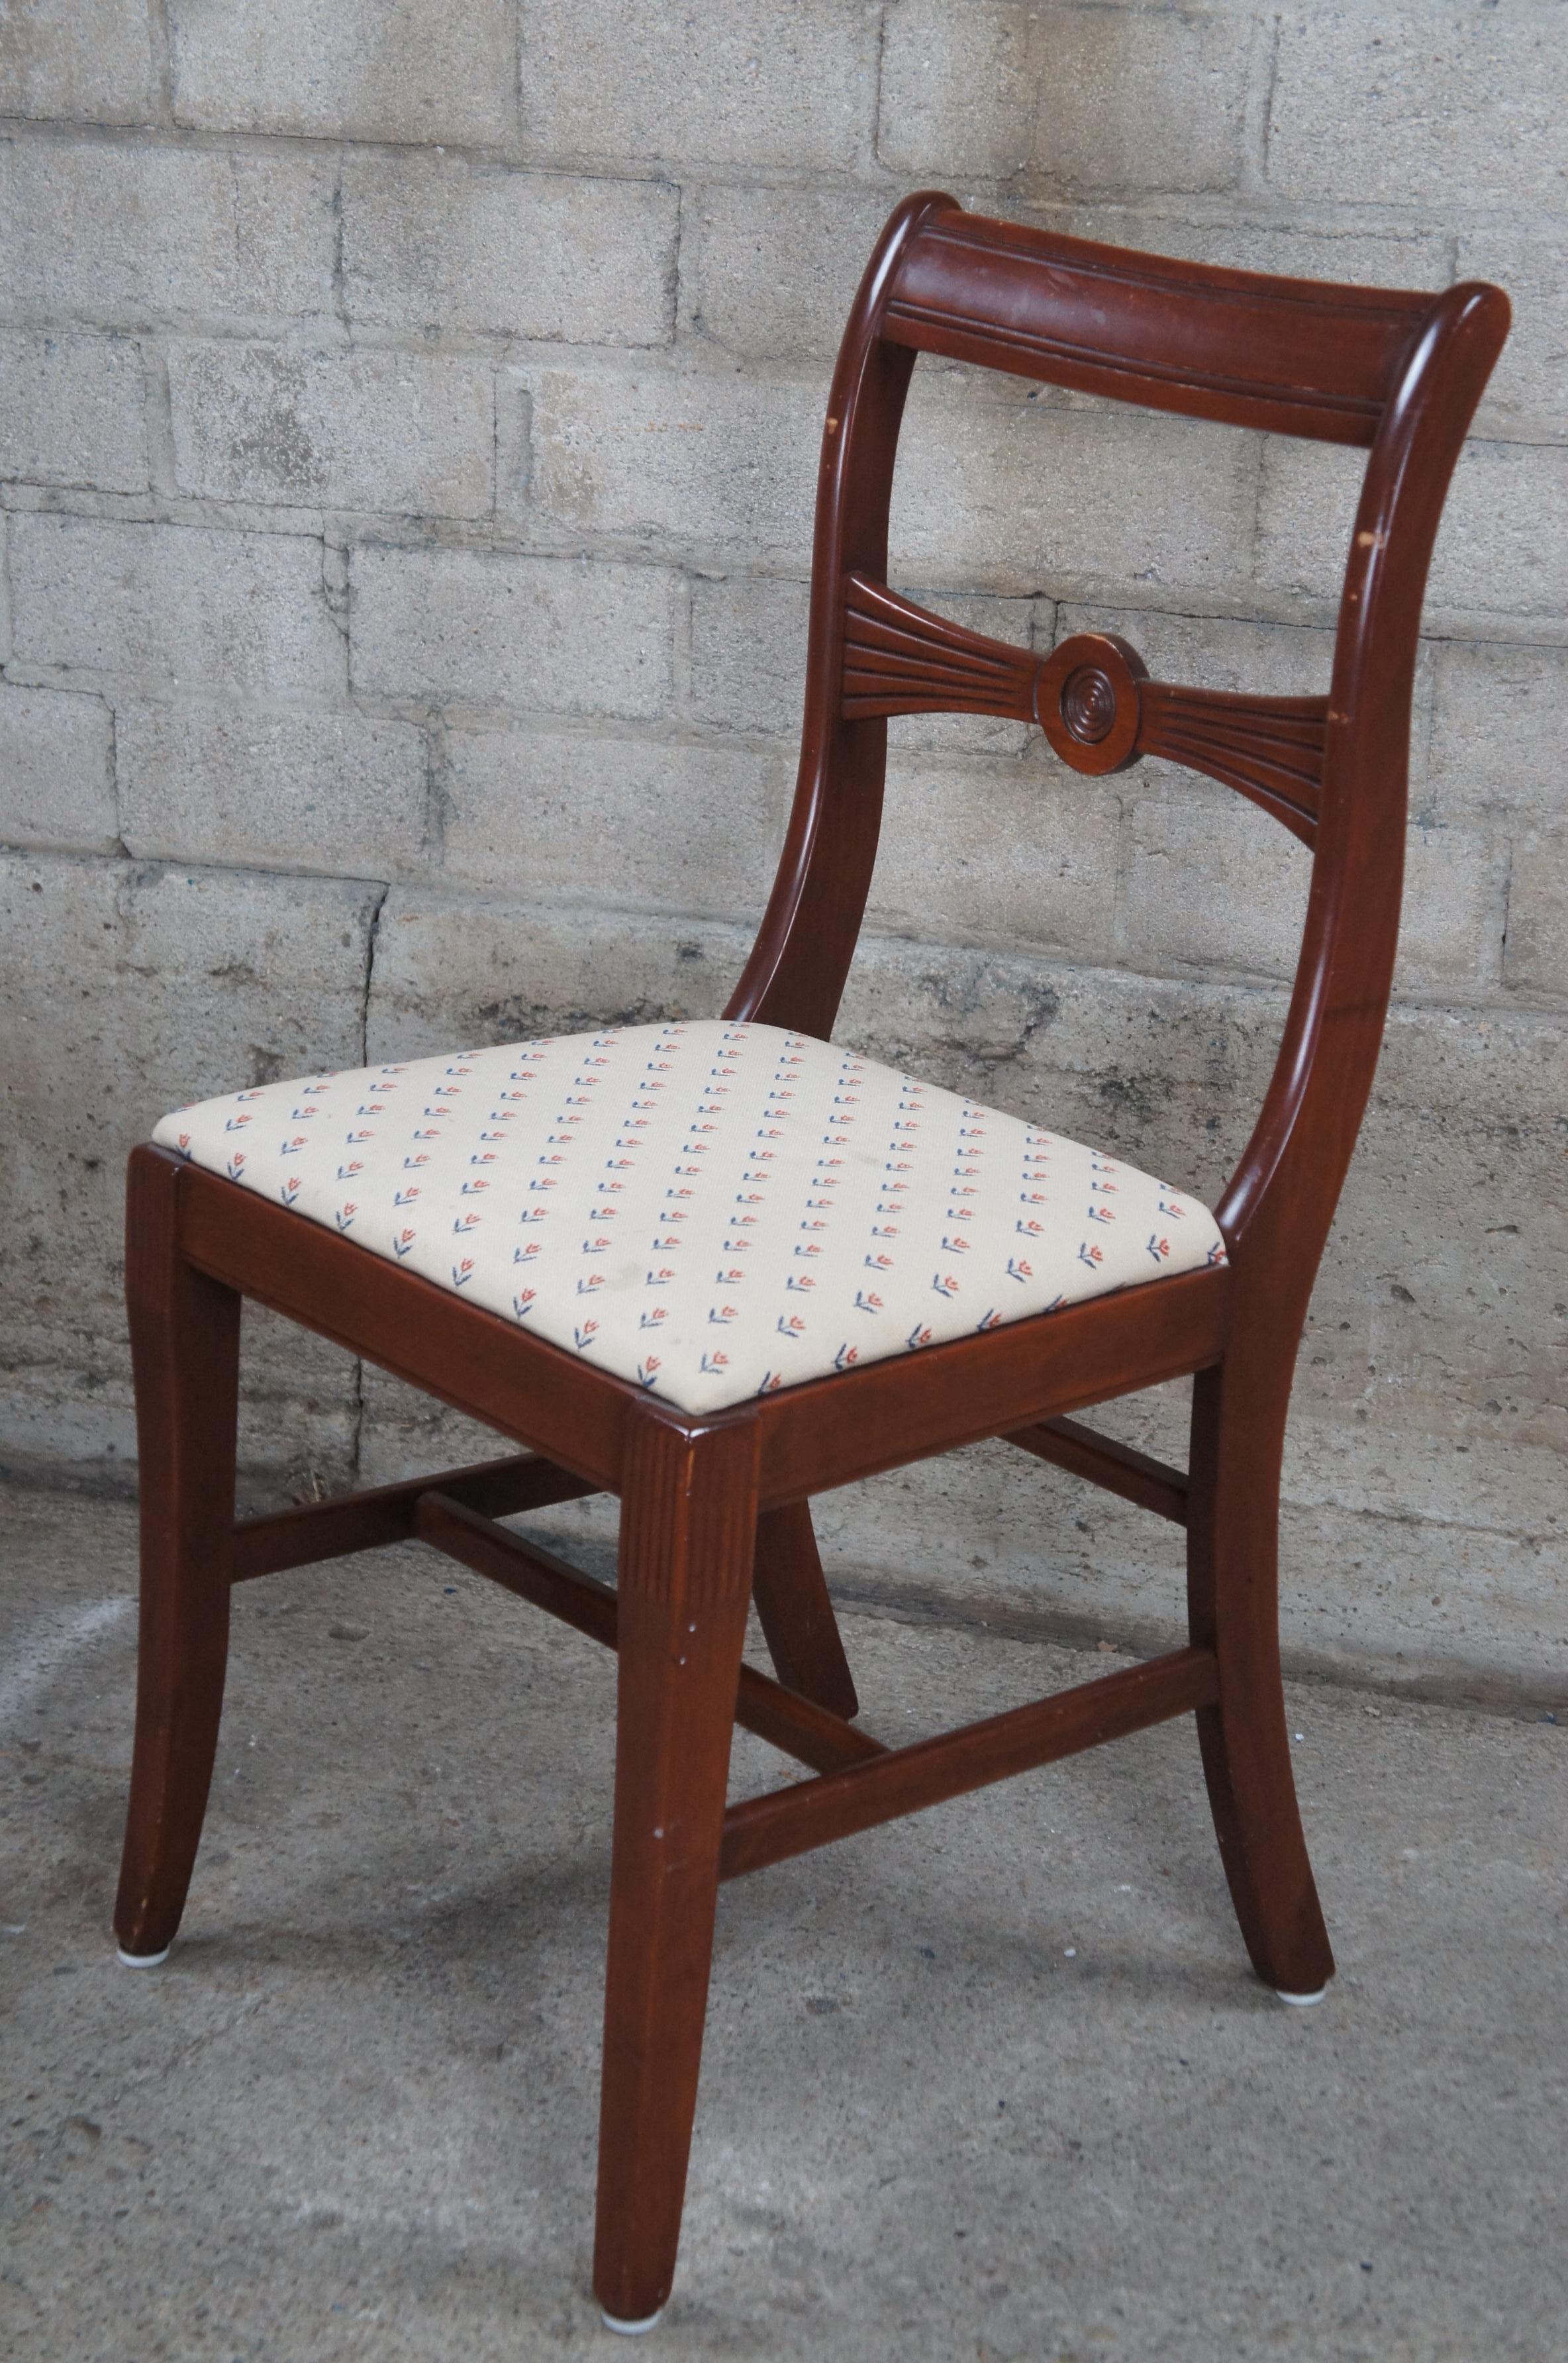 Antique Duncan Phyfe English Regency Style Mahogany Bow Back Dining Side Chair  In Good Condition For Sale In Dayton, OH